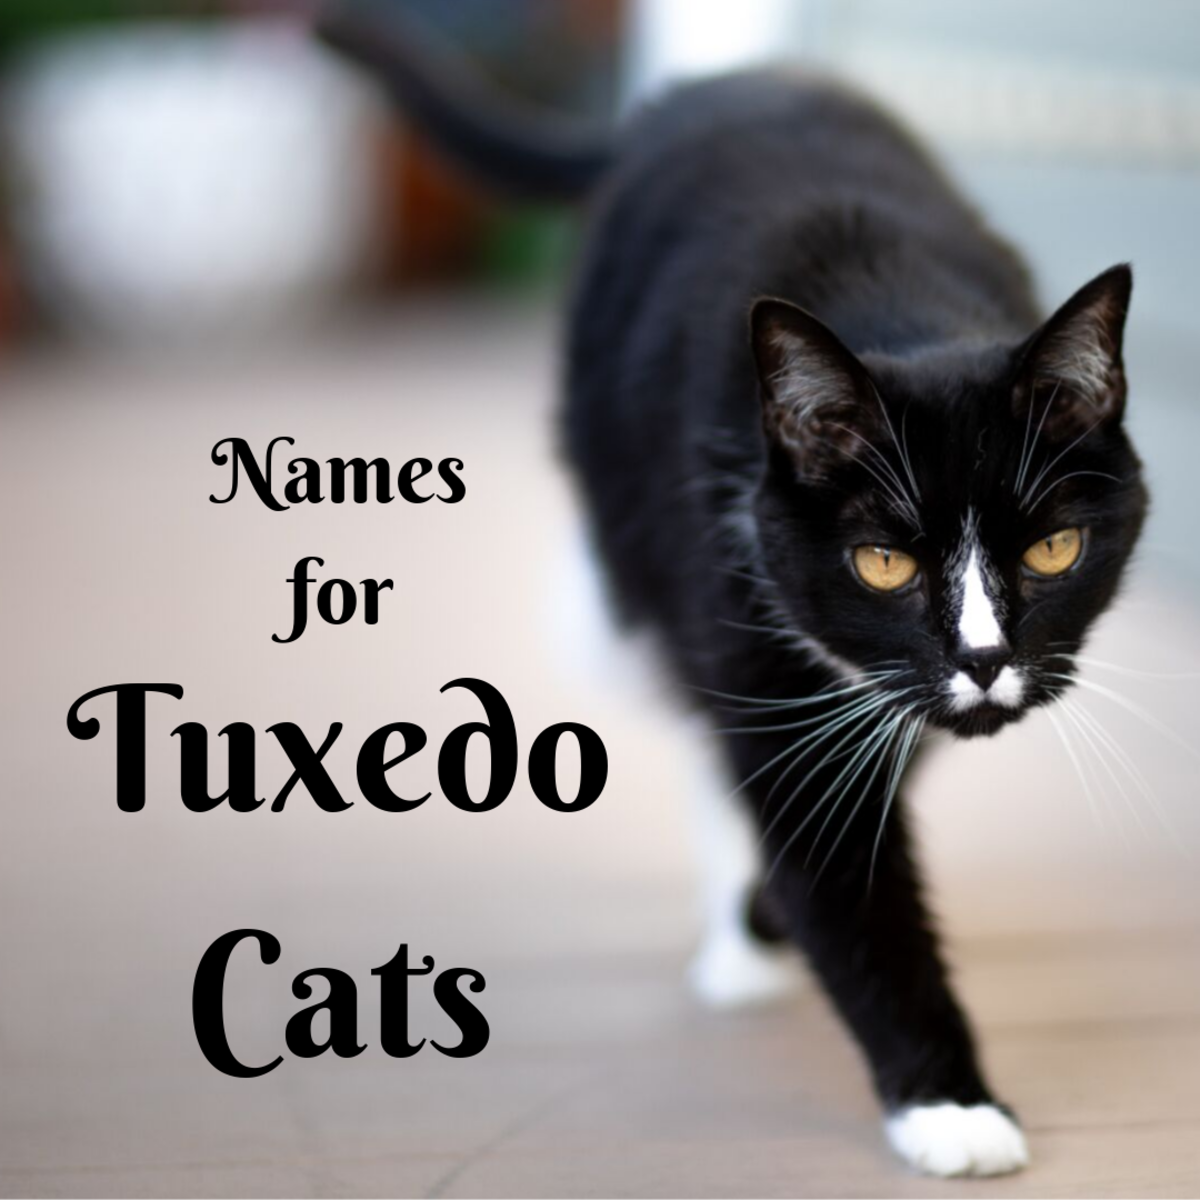 Creative Tuxedo Cat Names Female And Male Pethelpful By Fellow Animal Lovers And Experts,Mascarpone Cheese Frosting